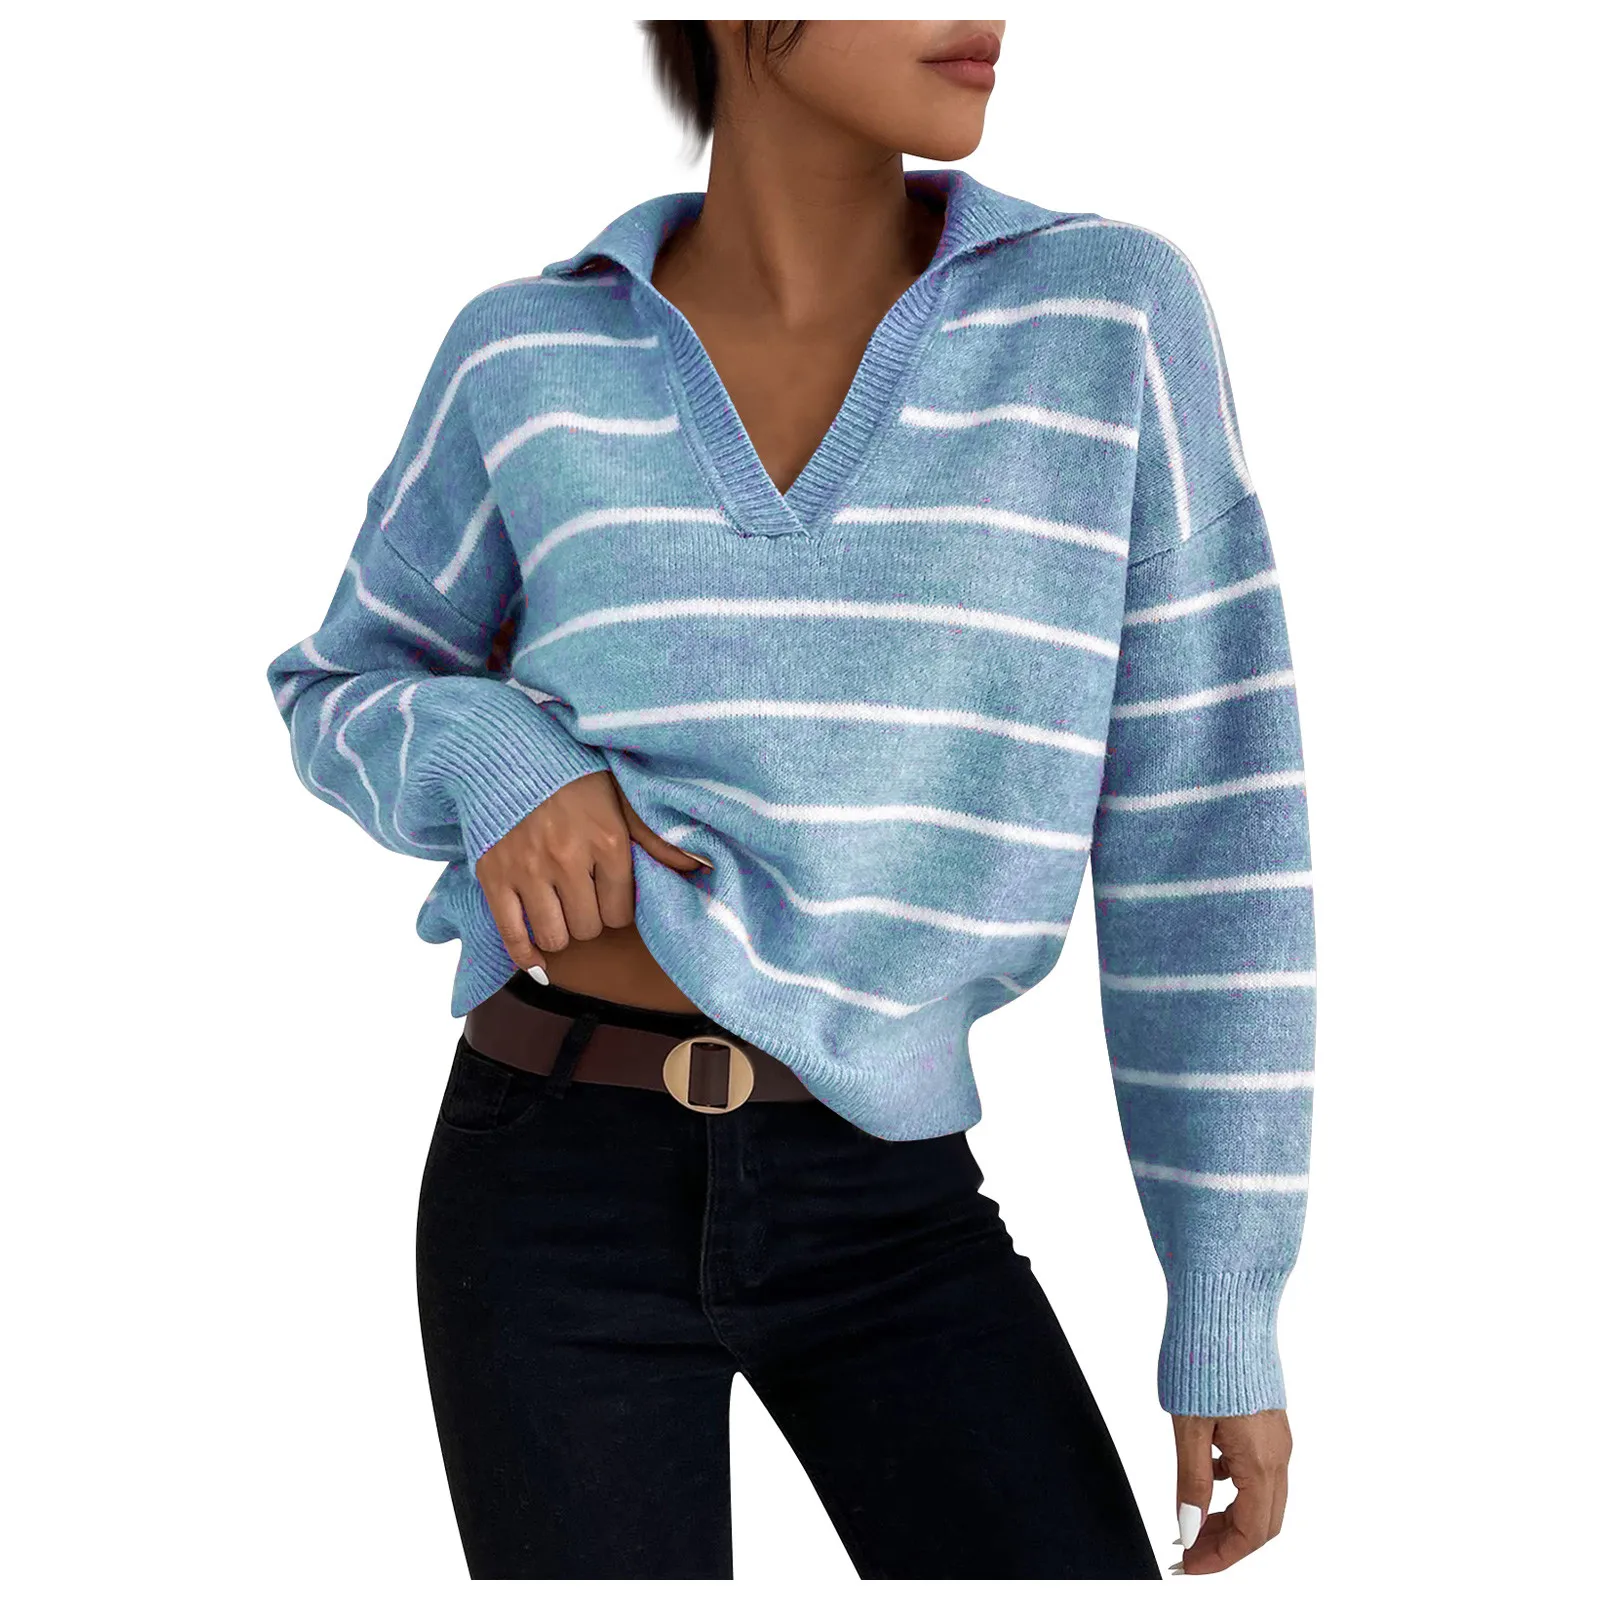 

Female Autumn and Winter clothing 2023 Women's Long Sleeve Striped Pullover Sweaters V Neck Collar Knit Loose Jumper Tops